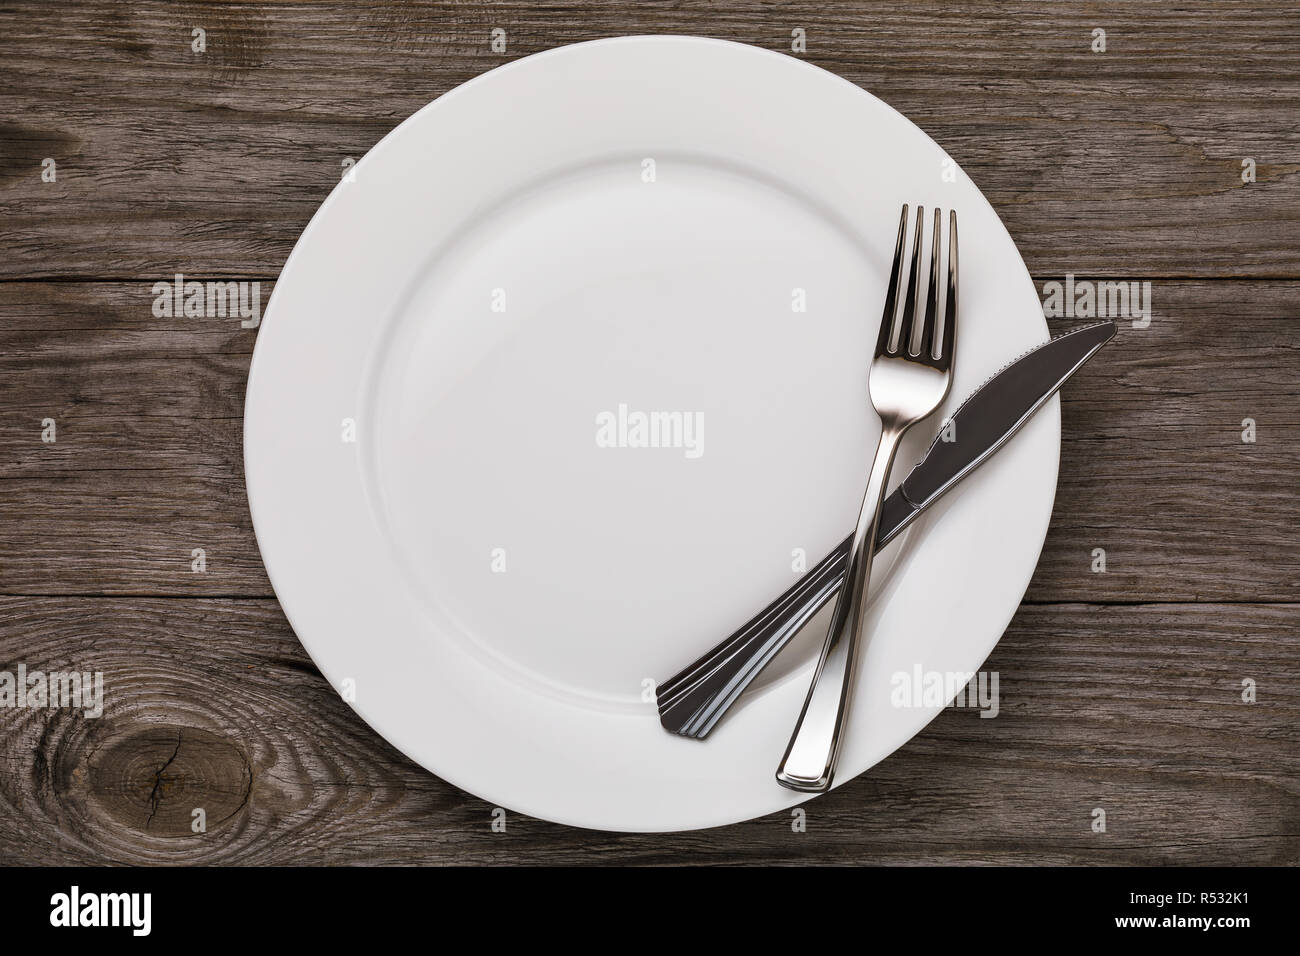 Empty white ceramic plate and cutlery on wooden table, top view Stock Photo